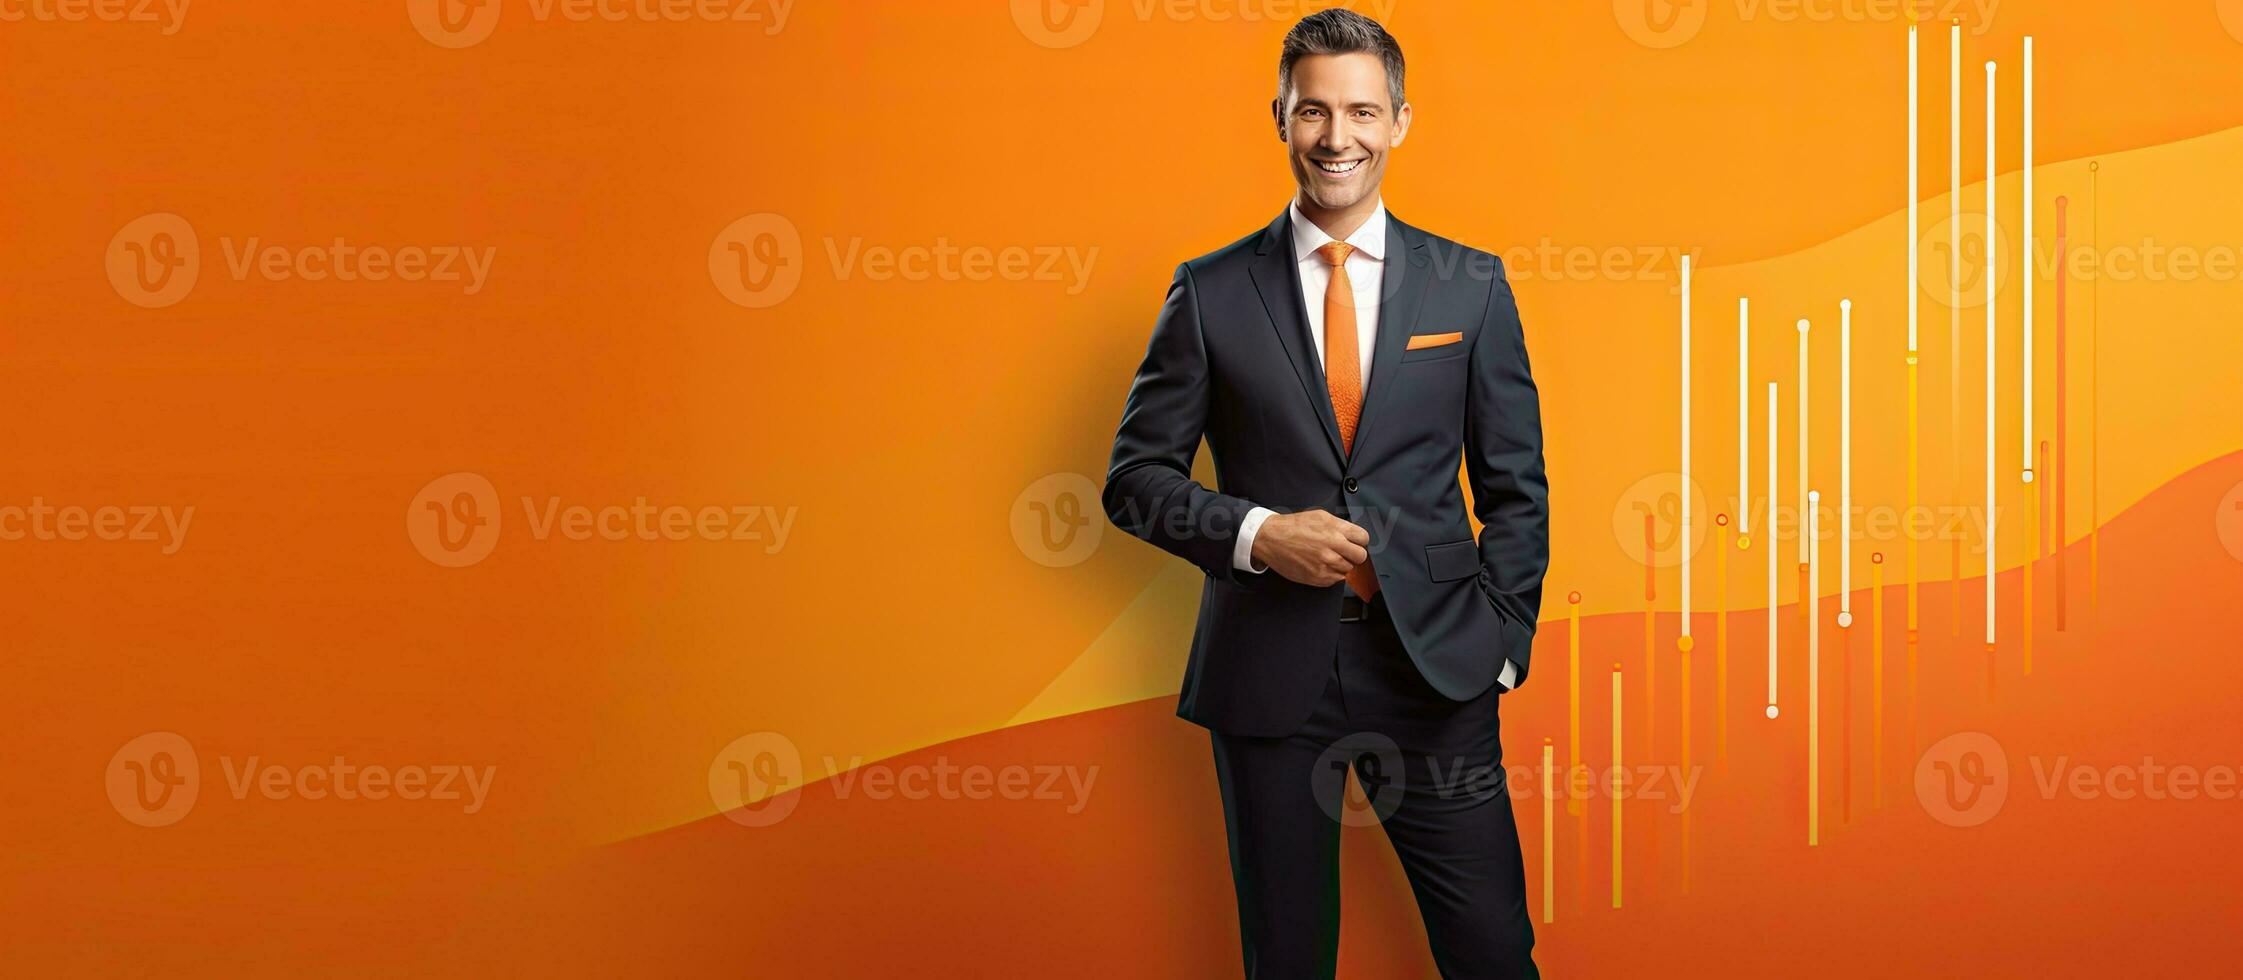 Colorful graph and candlestick icons on empty copy space orange background depicting finance investment and profit complement a smiling businessman with h photo